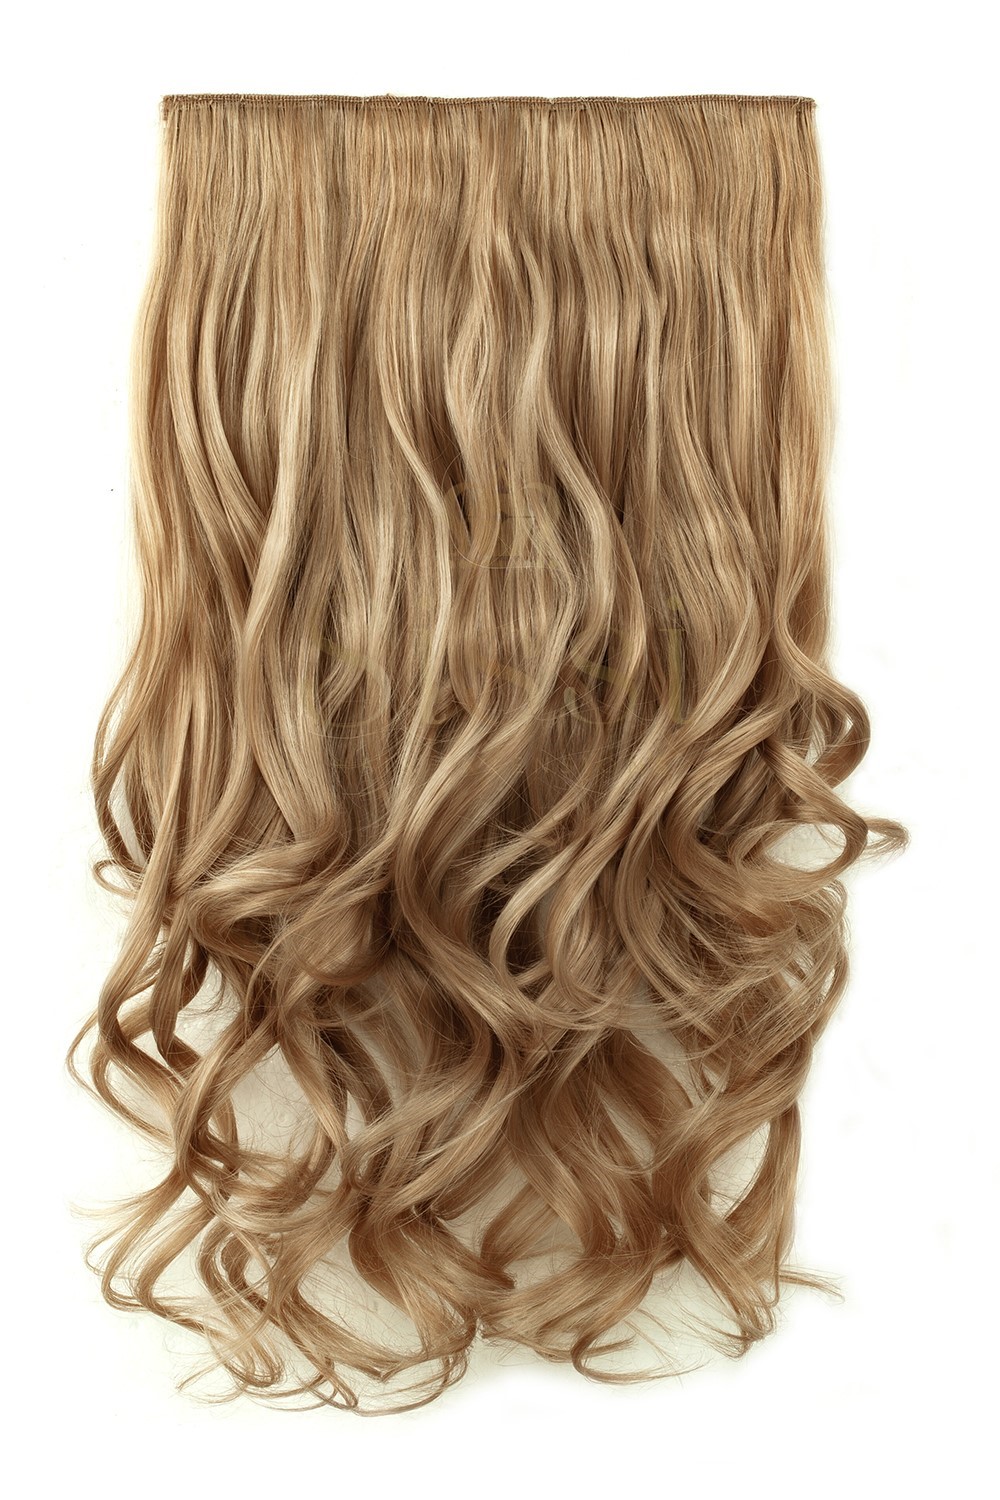 Deluxe Light Chloe 20" 1 Piece Curly Clip In Hair Extension